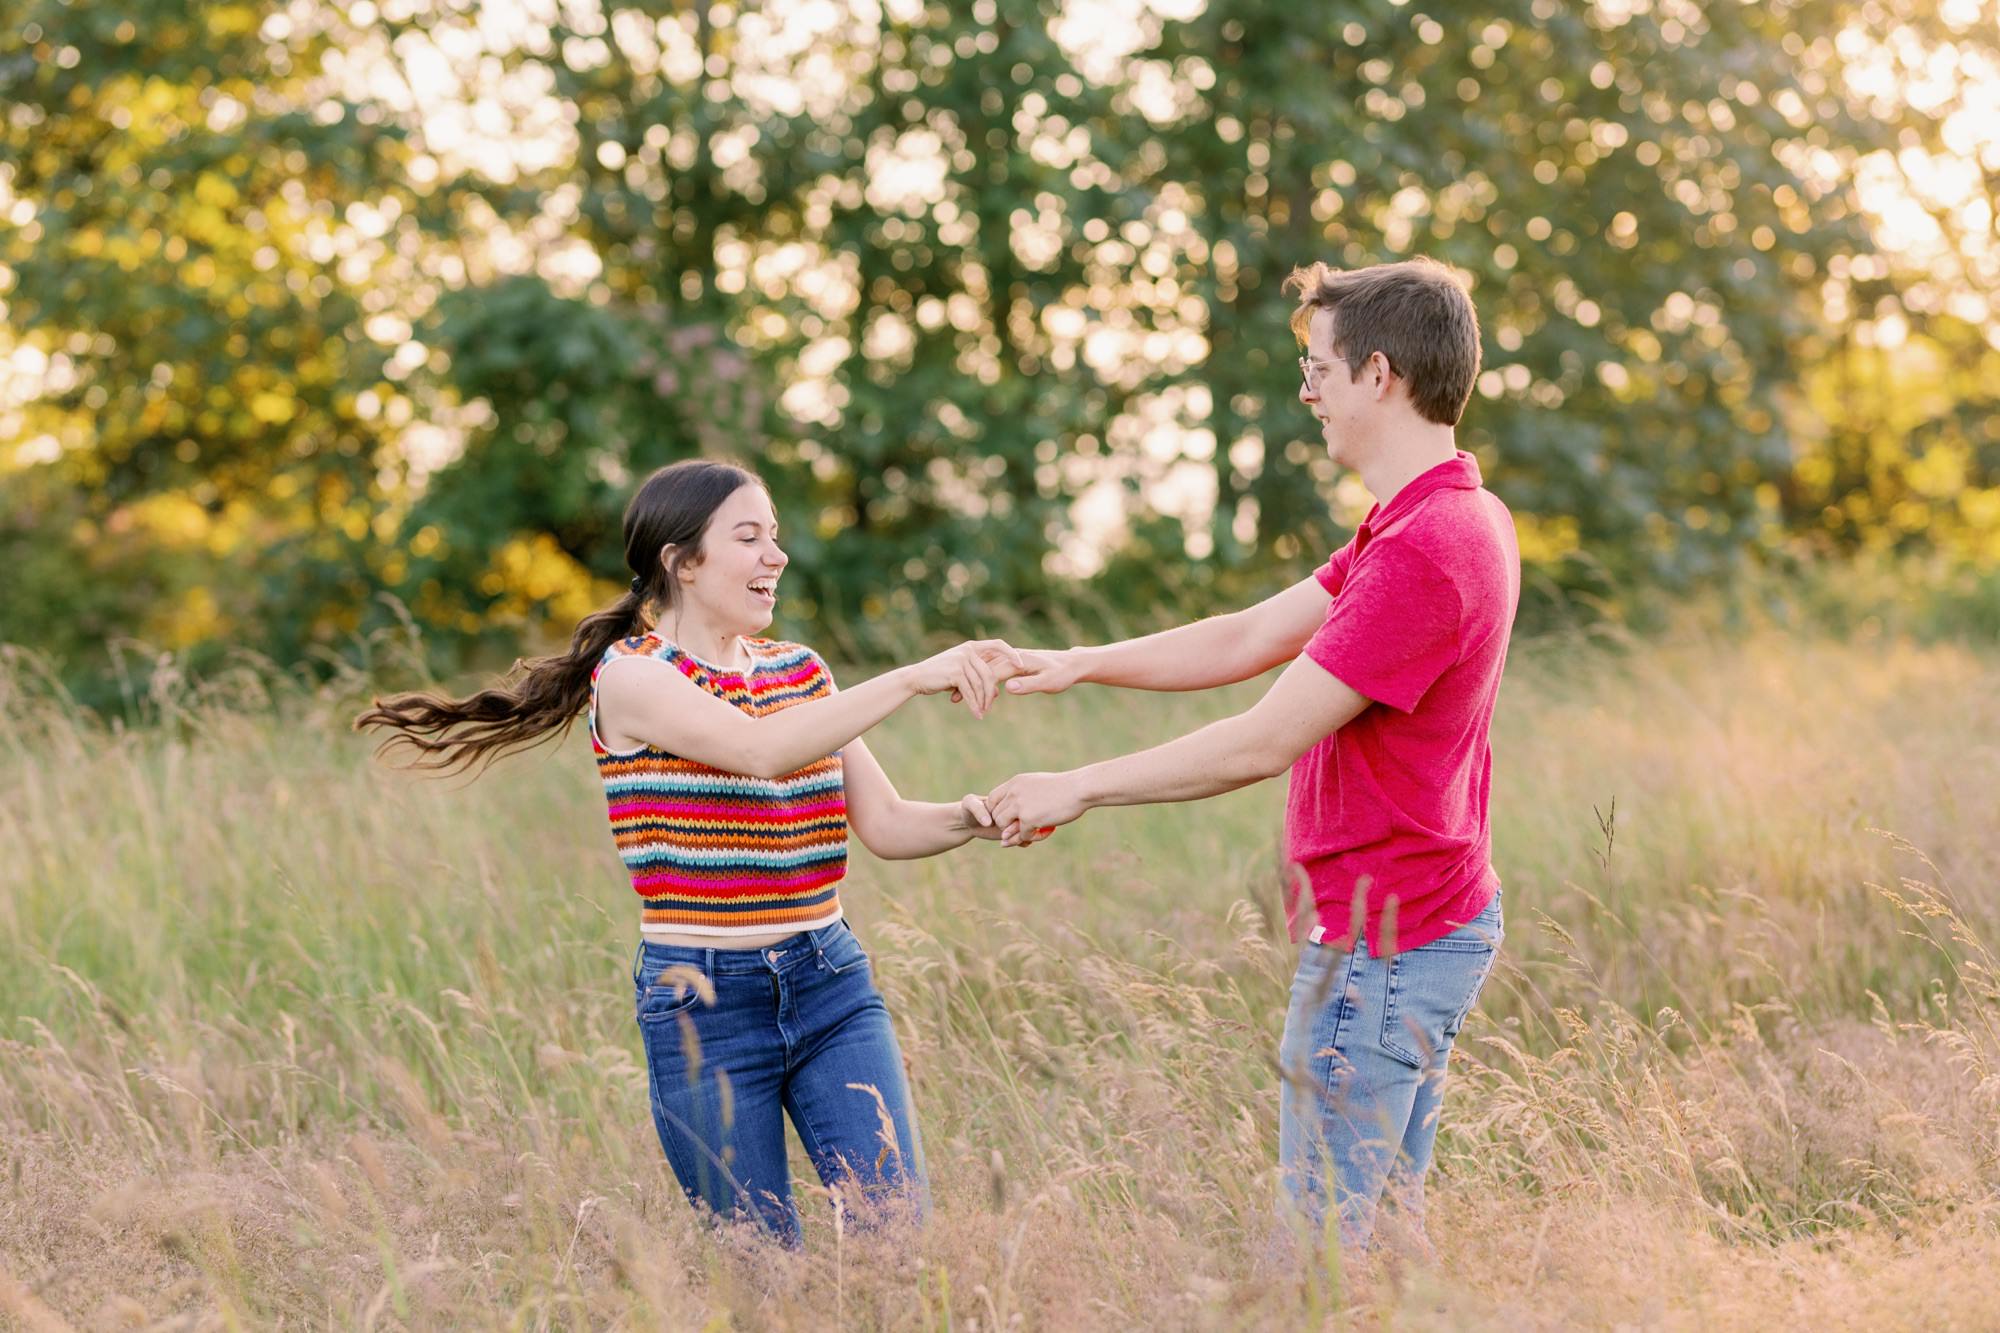 A couple dancing in a grassy field, with the woman wearing a colorful knit vest and the man in a red shirt.